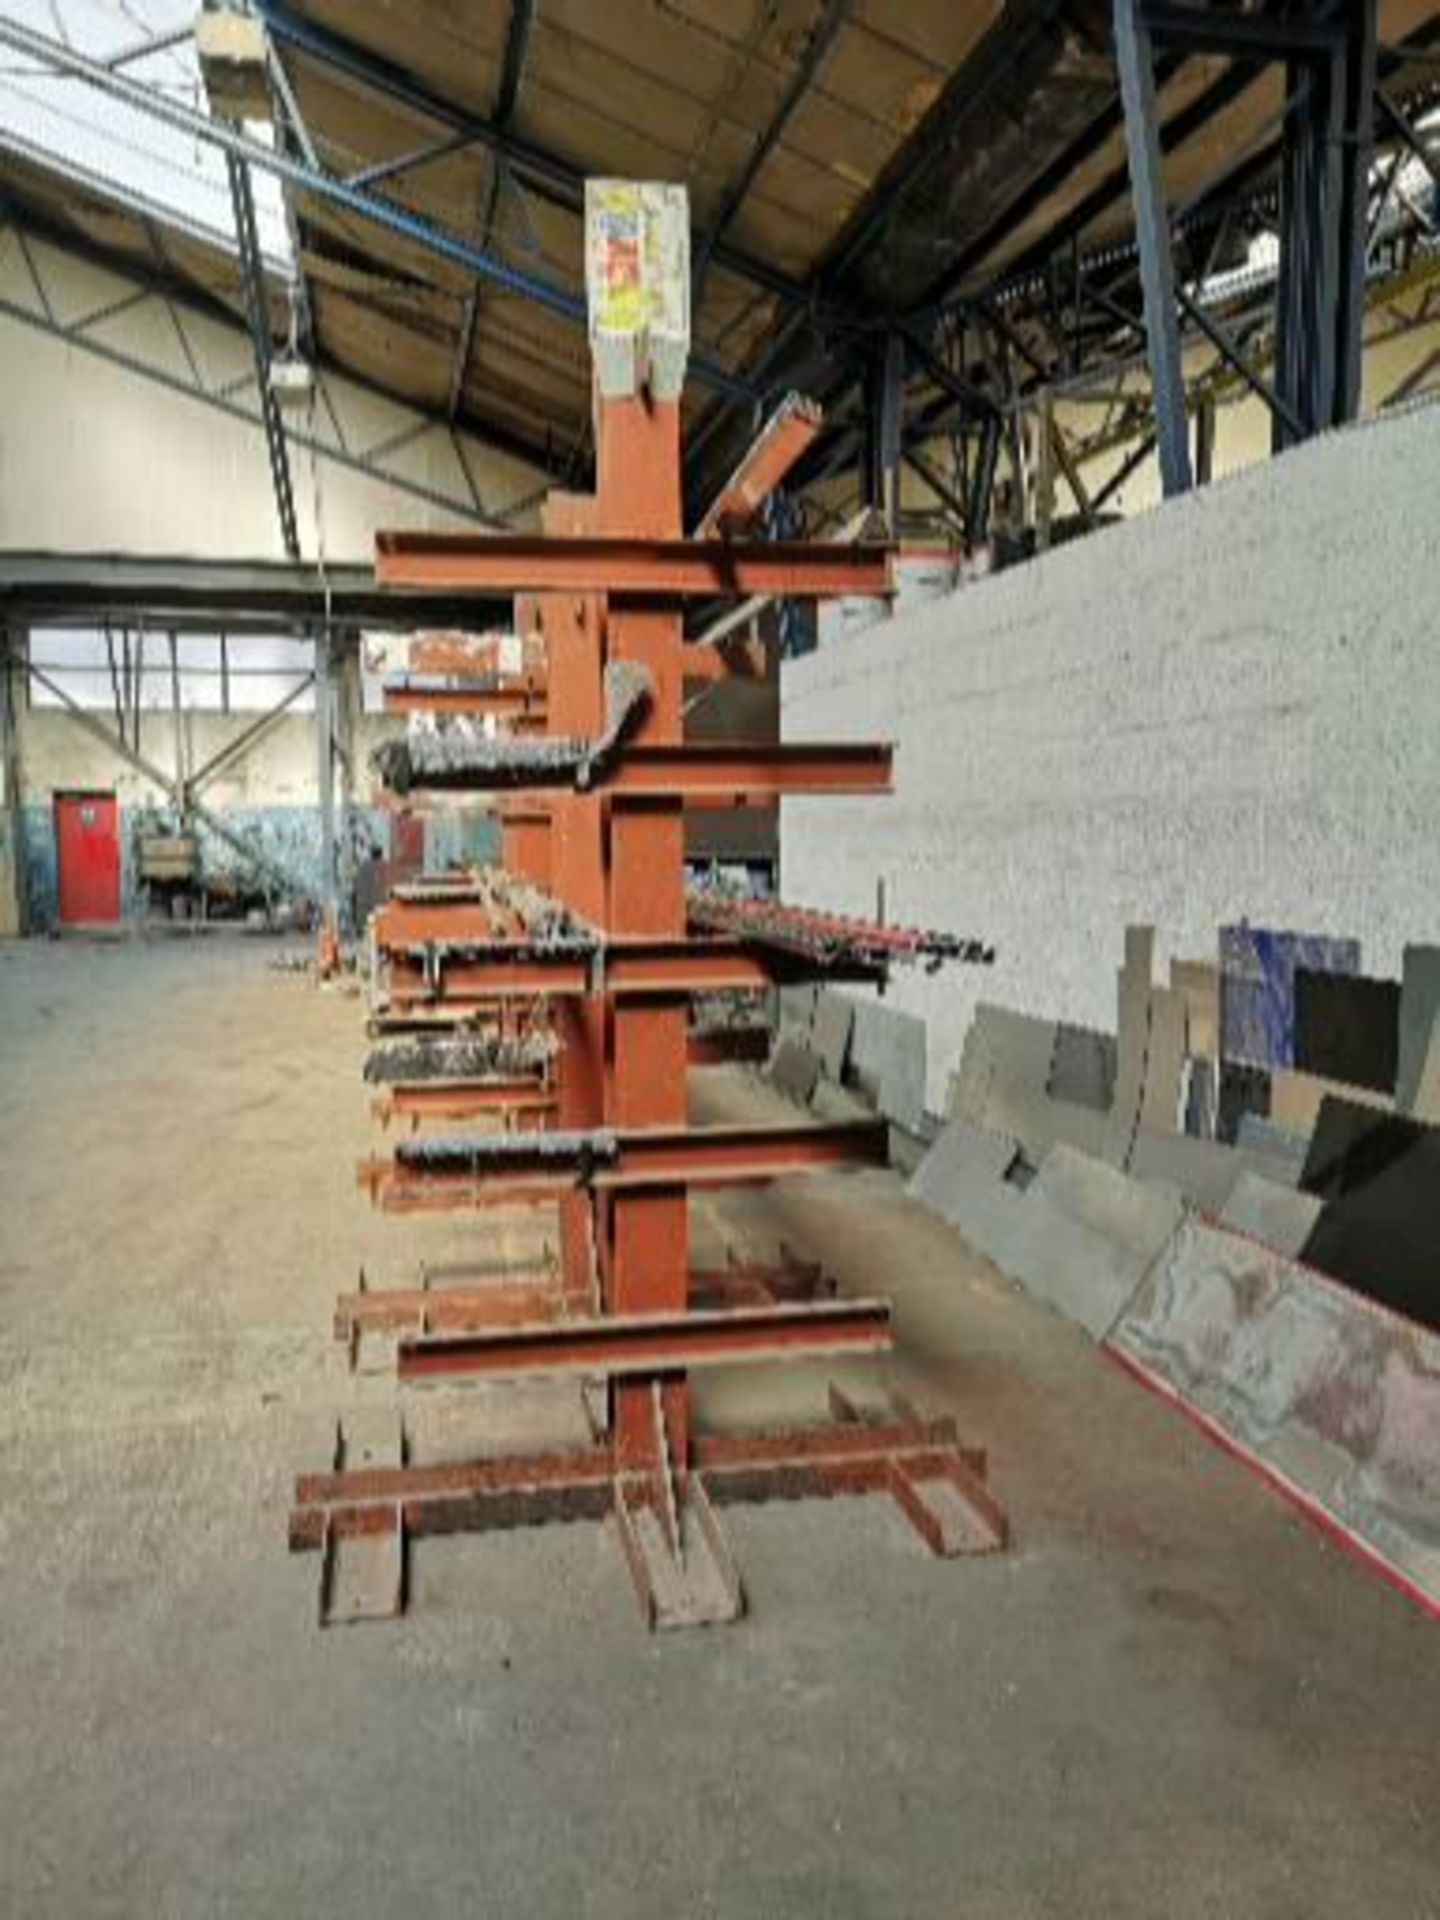 4 Extremely Heavy-Duty Metal A Frames for Holding Steel or Aluminium (unbranded) *PLUS VAT*